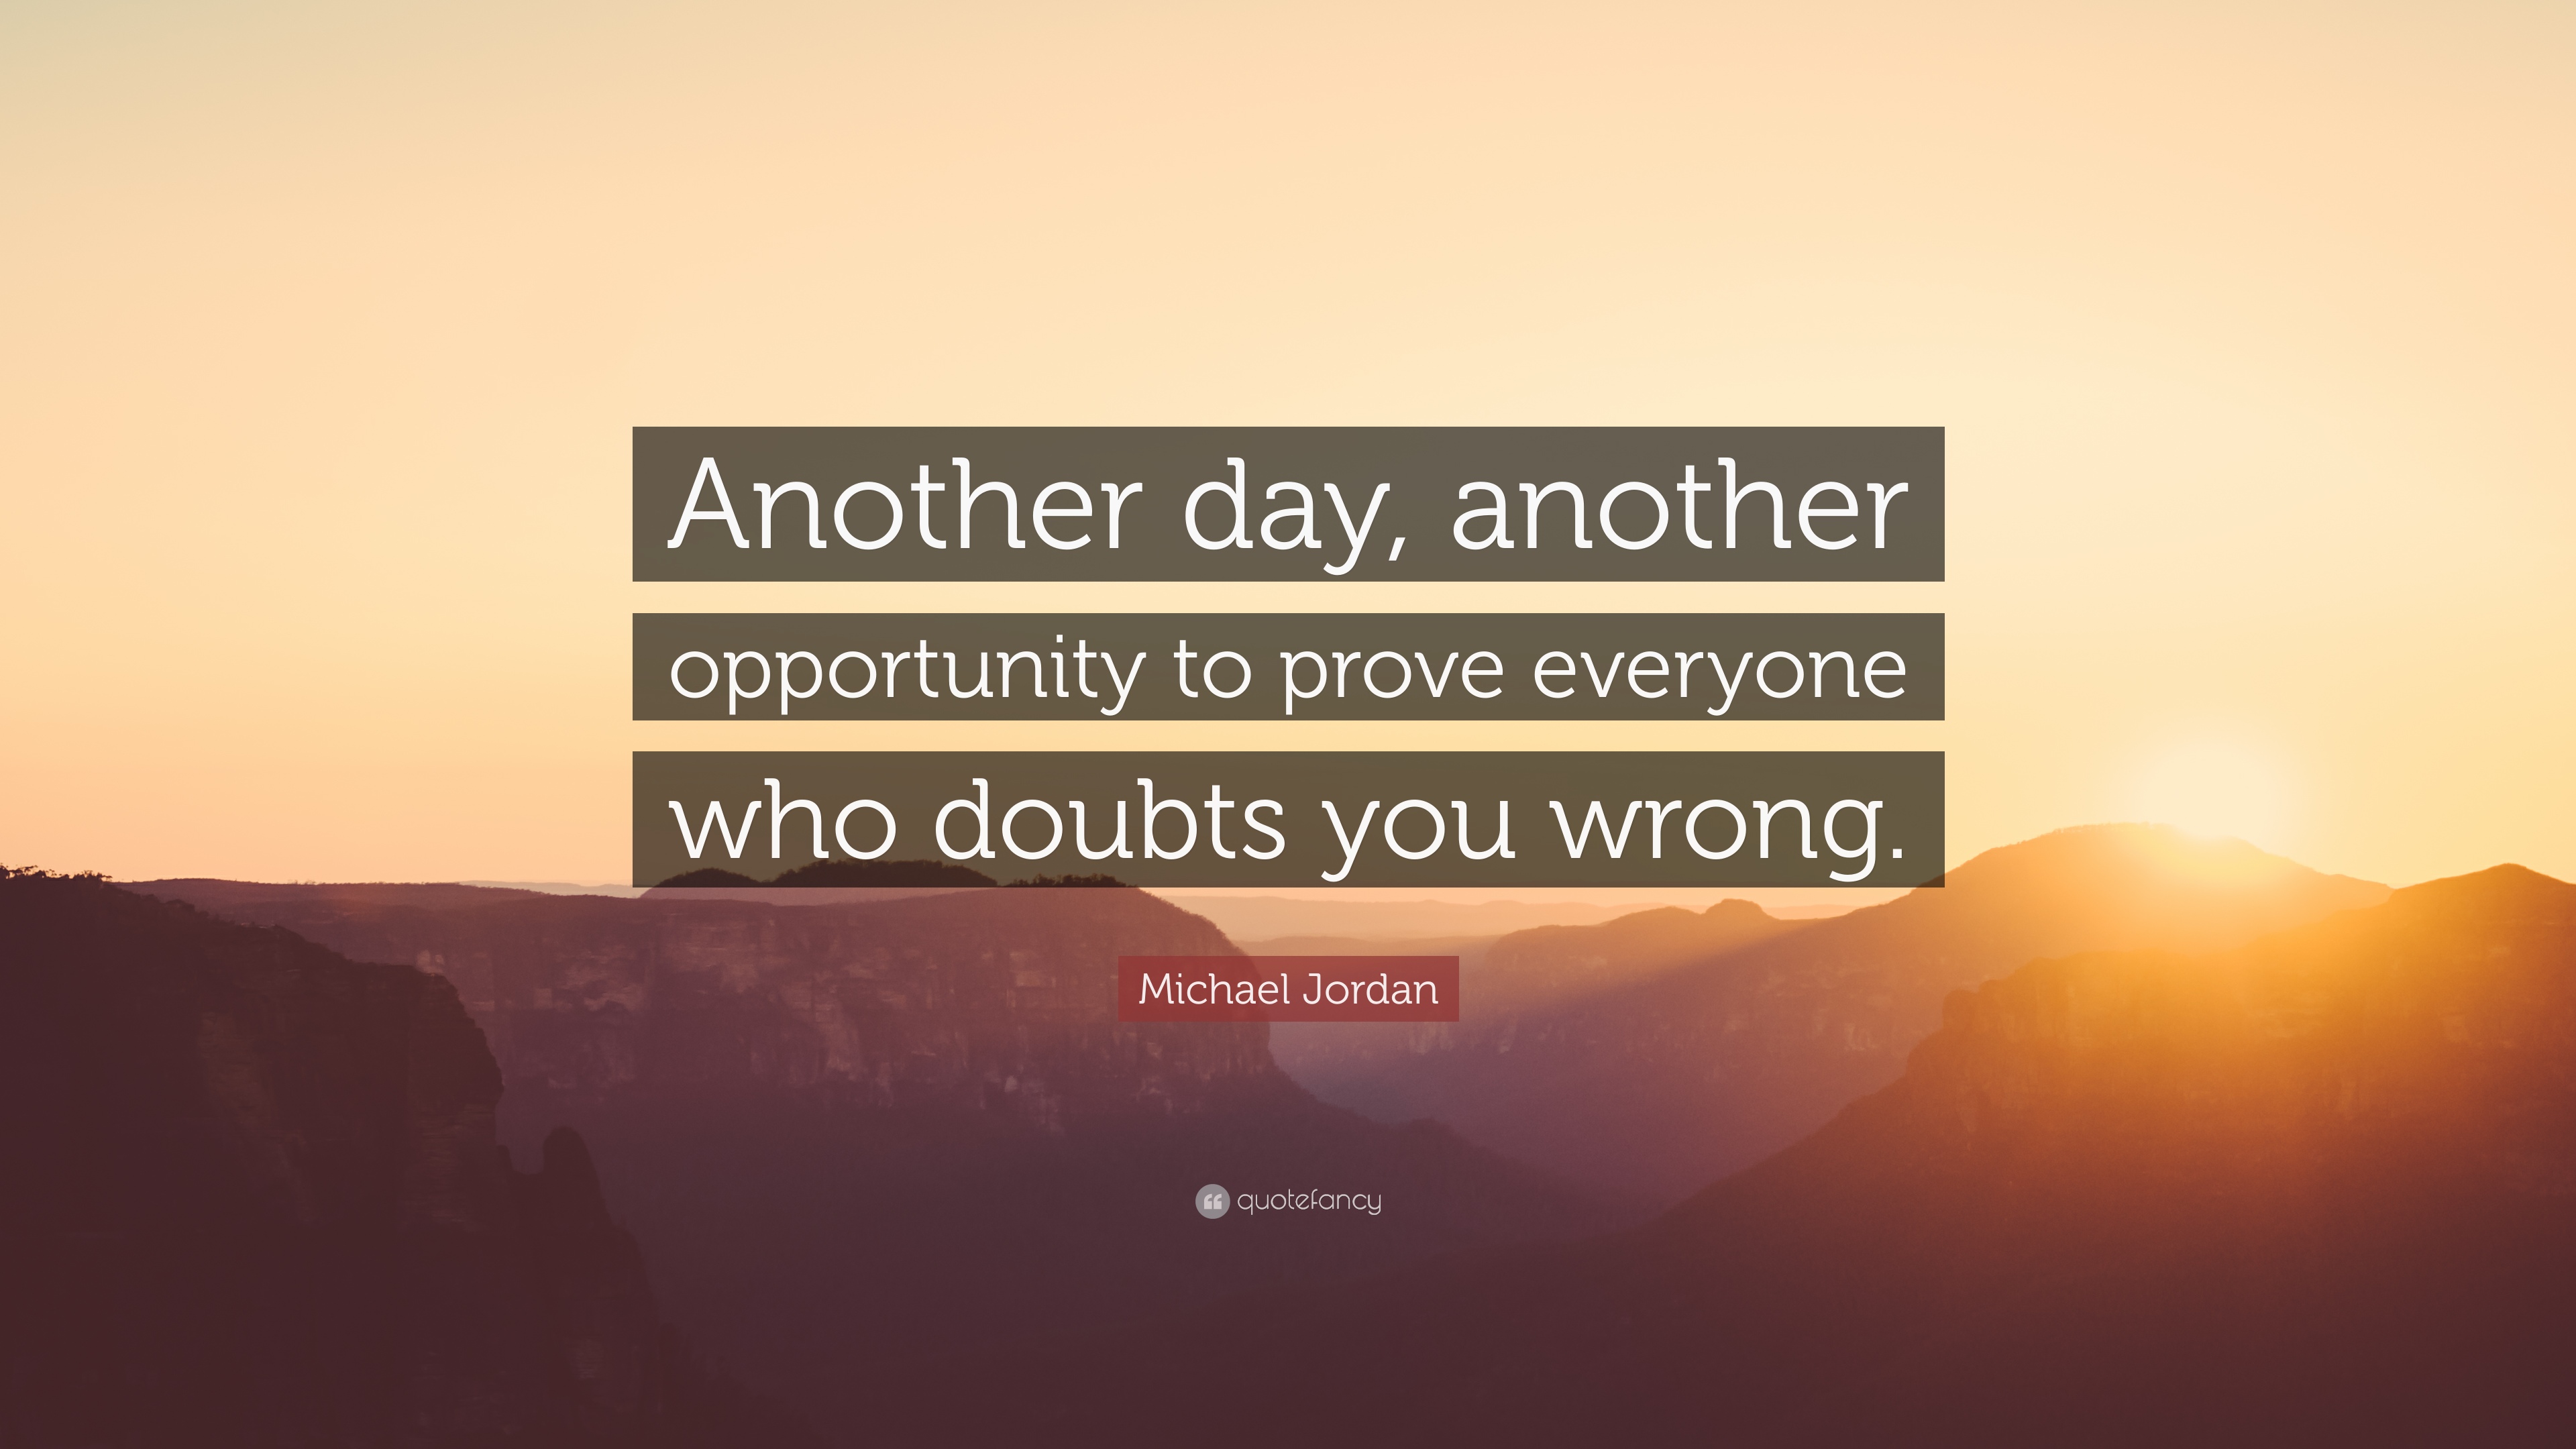 Michael Jordan Quote: “Another day, another opportunity to prove ...